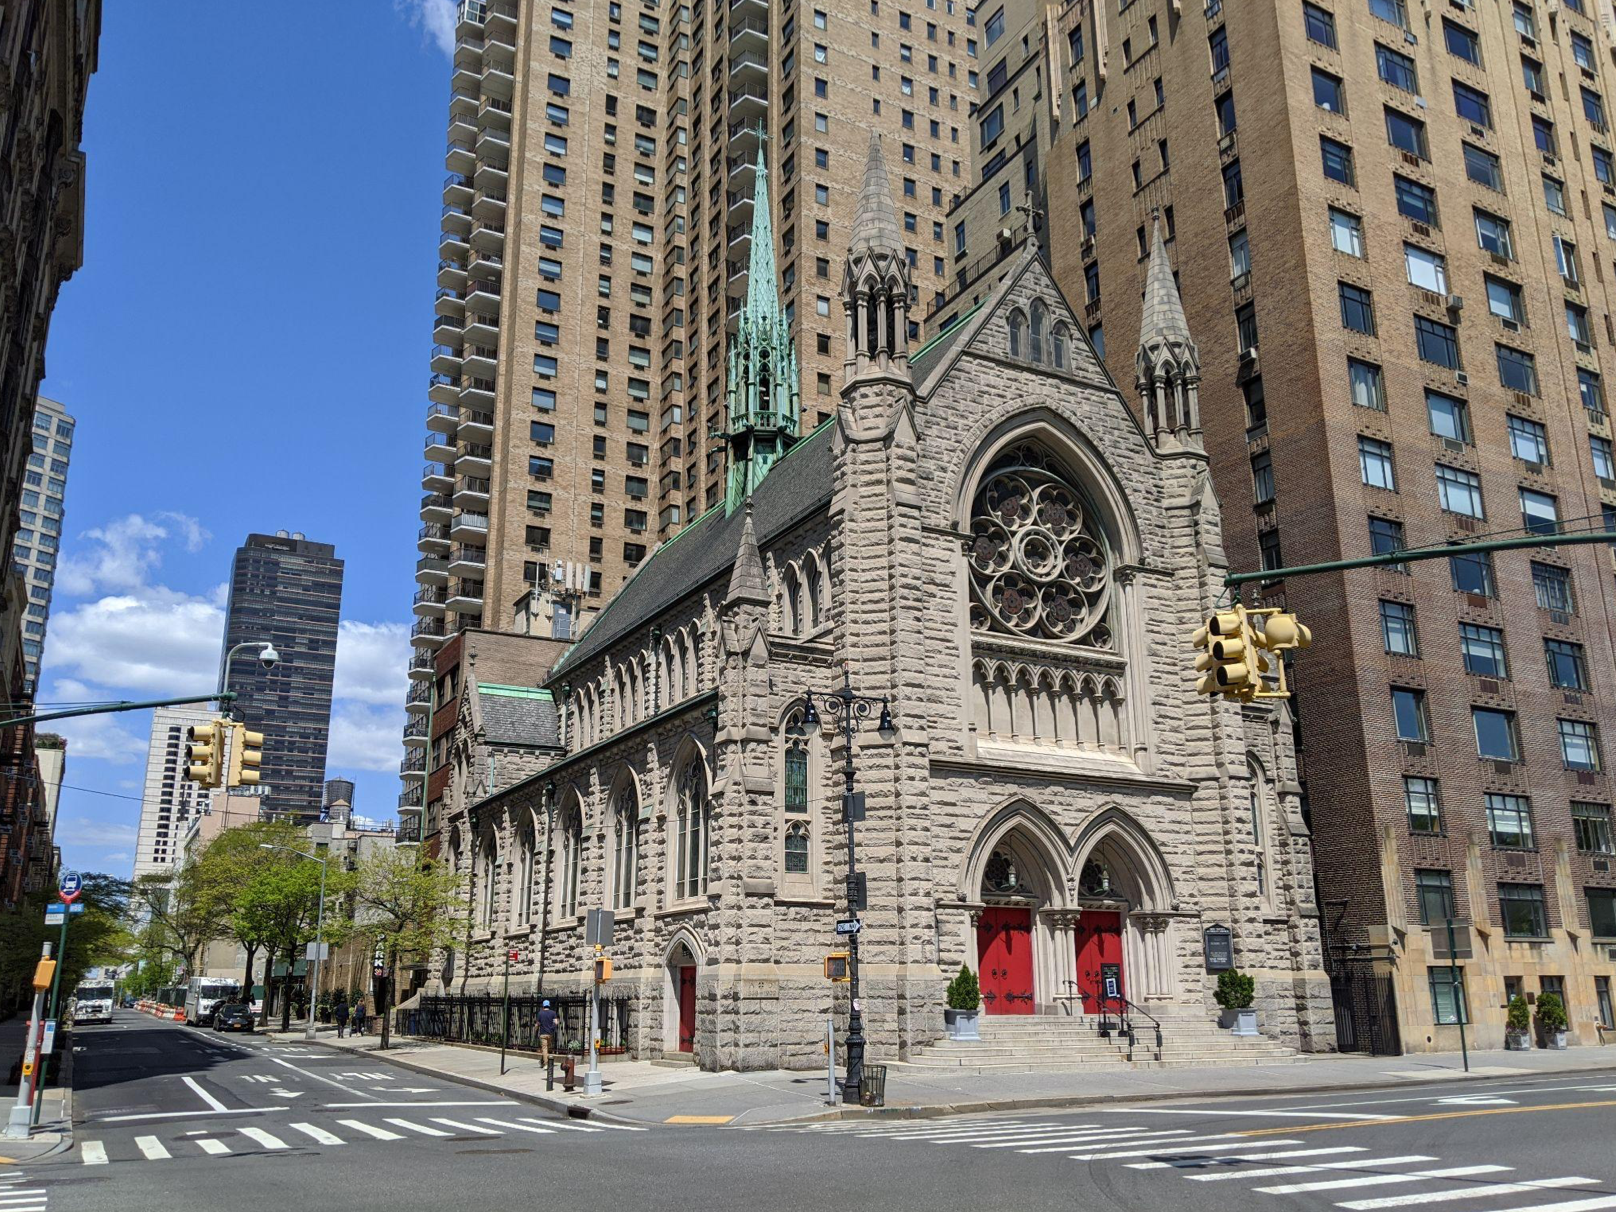 The Evangelical Lutheran Church of the Holy Trinity NYC